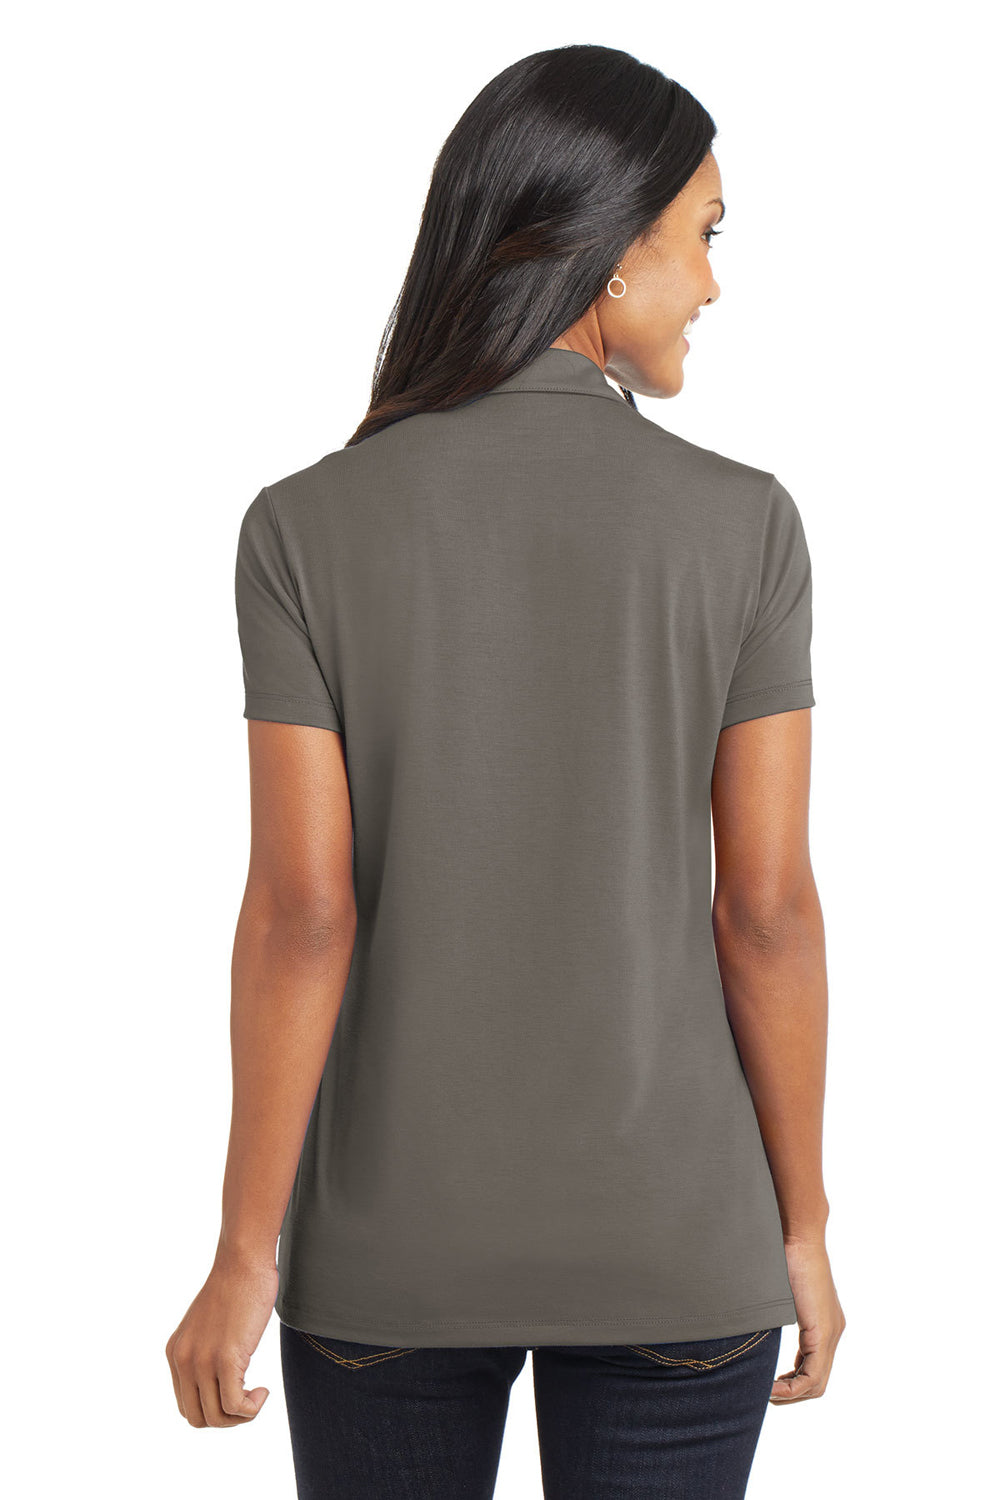 Port Authority L568 Womens Cotton Touch Performance Moisture Wicking Short Sleeve Polo Shirt Smoke Grey Back